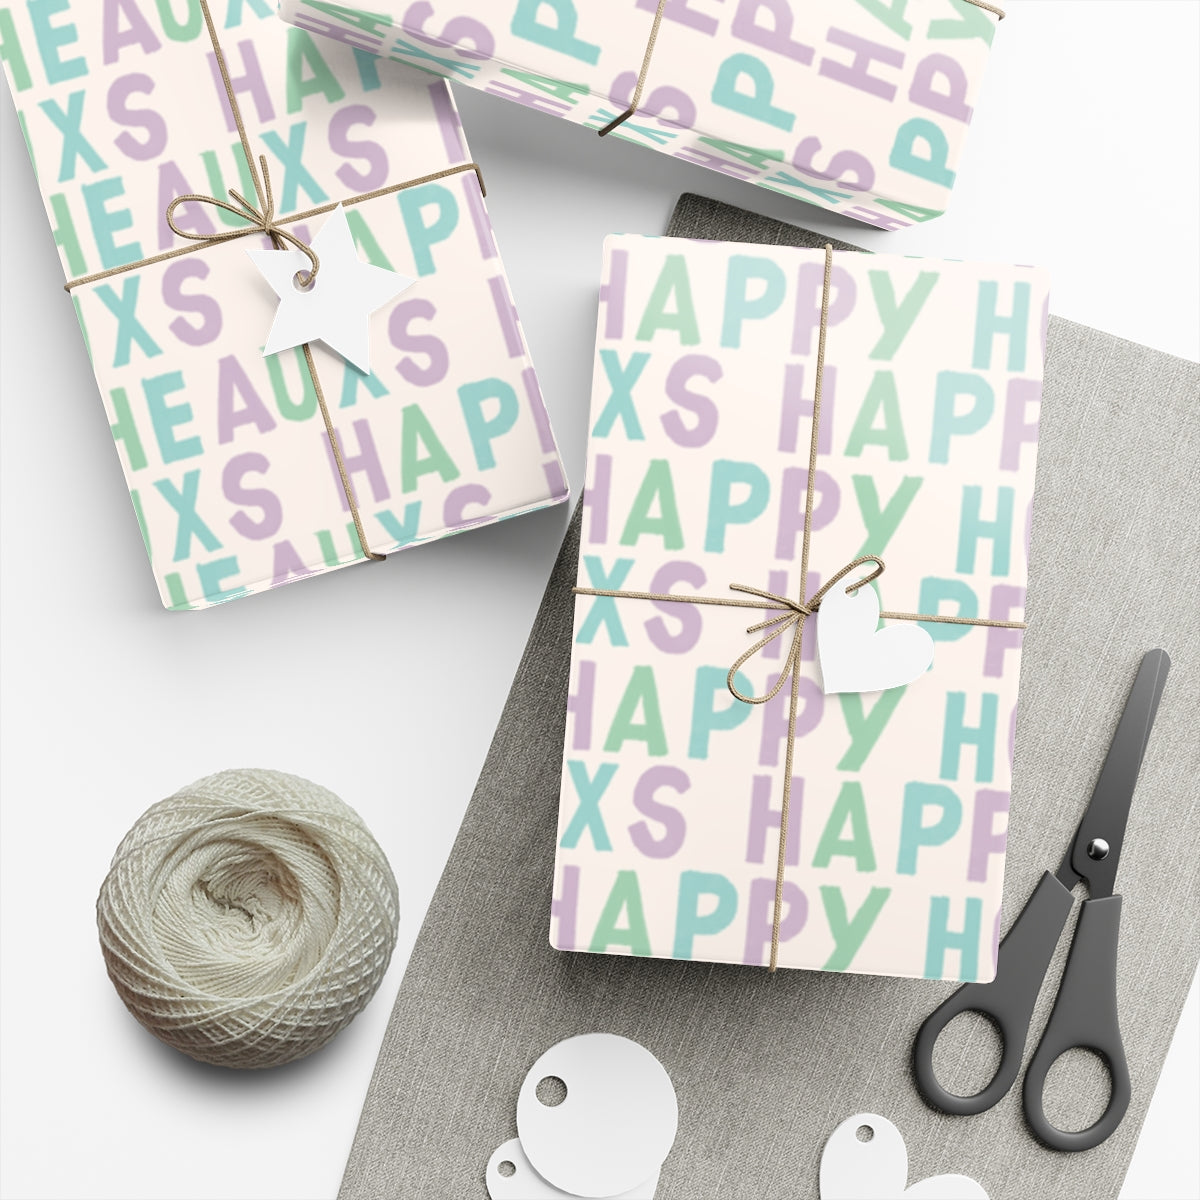 Funny Christmas Gift Wrapping Paper Roll | Happy Holidays Heauxs | Heaux Funny Party Event | Gift Wrap | Heaux heaux heaux | Friend Gift Ideas | Christmas Prank Gift